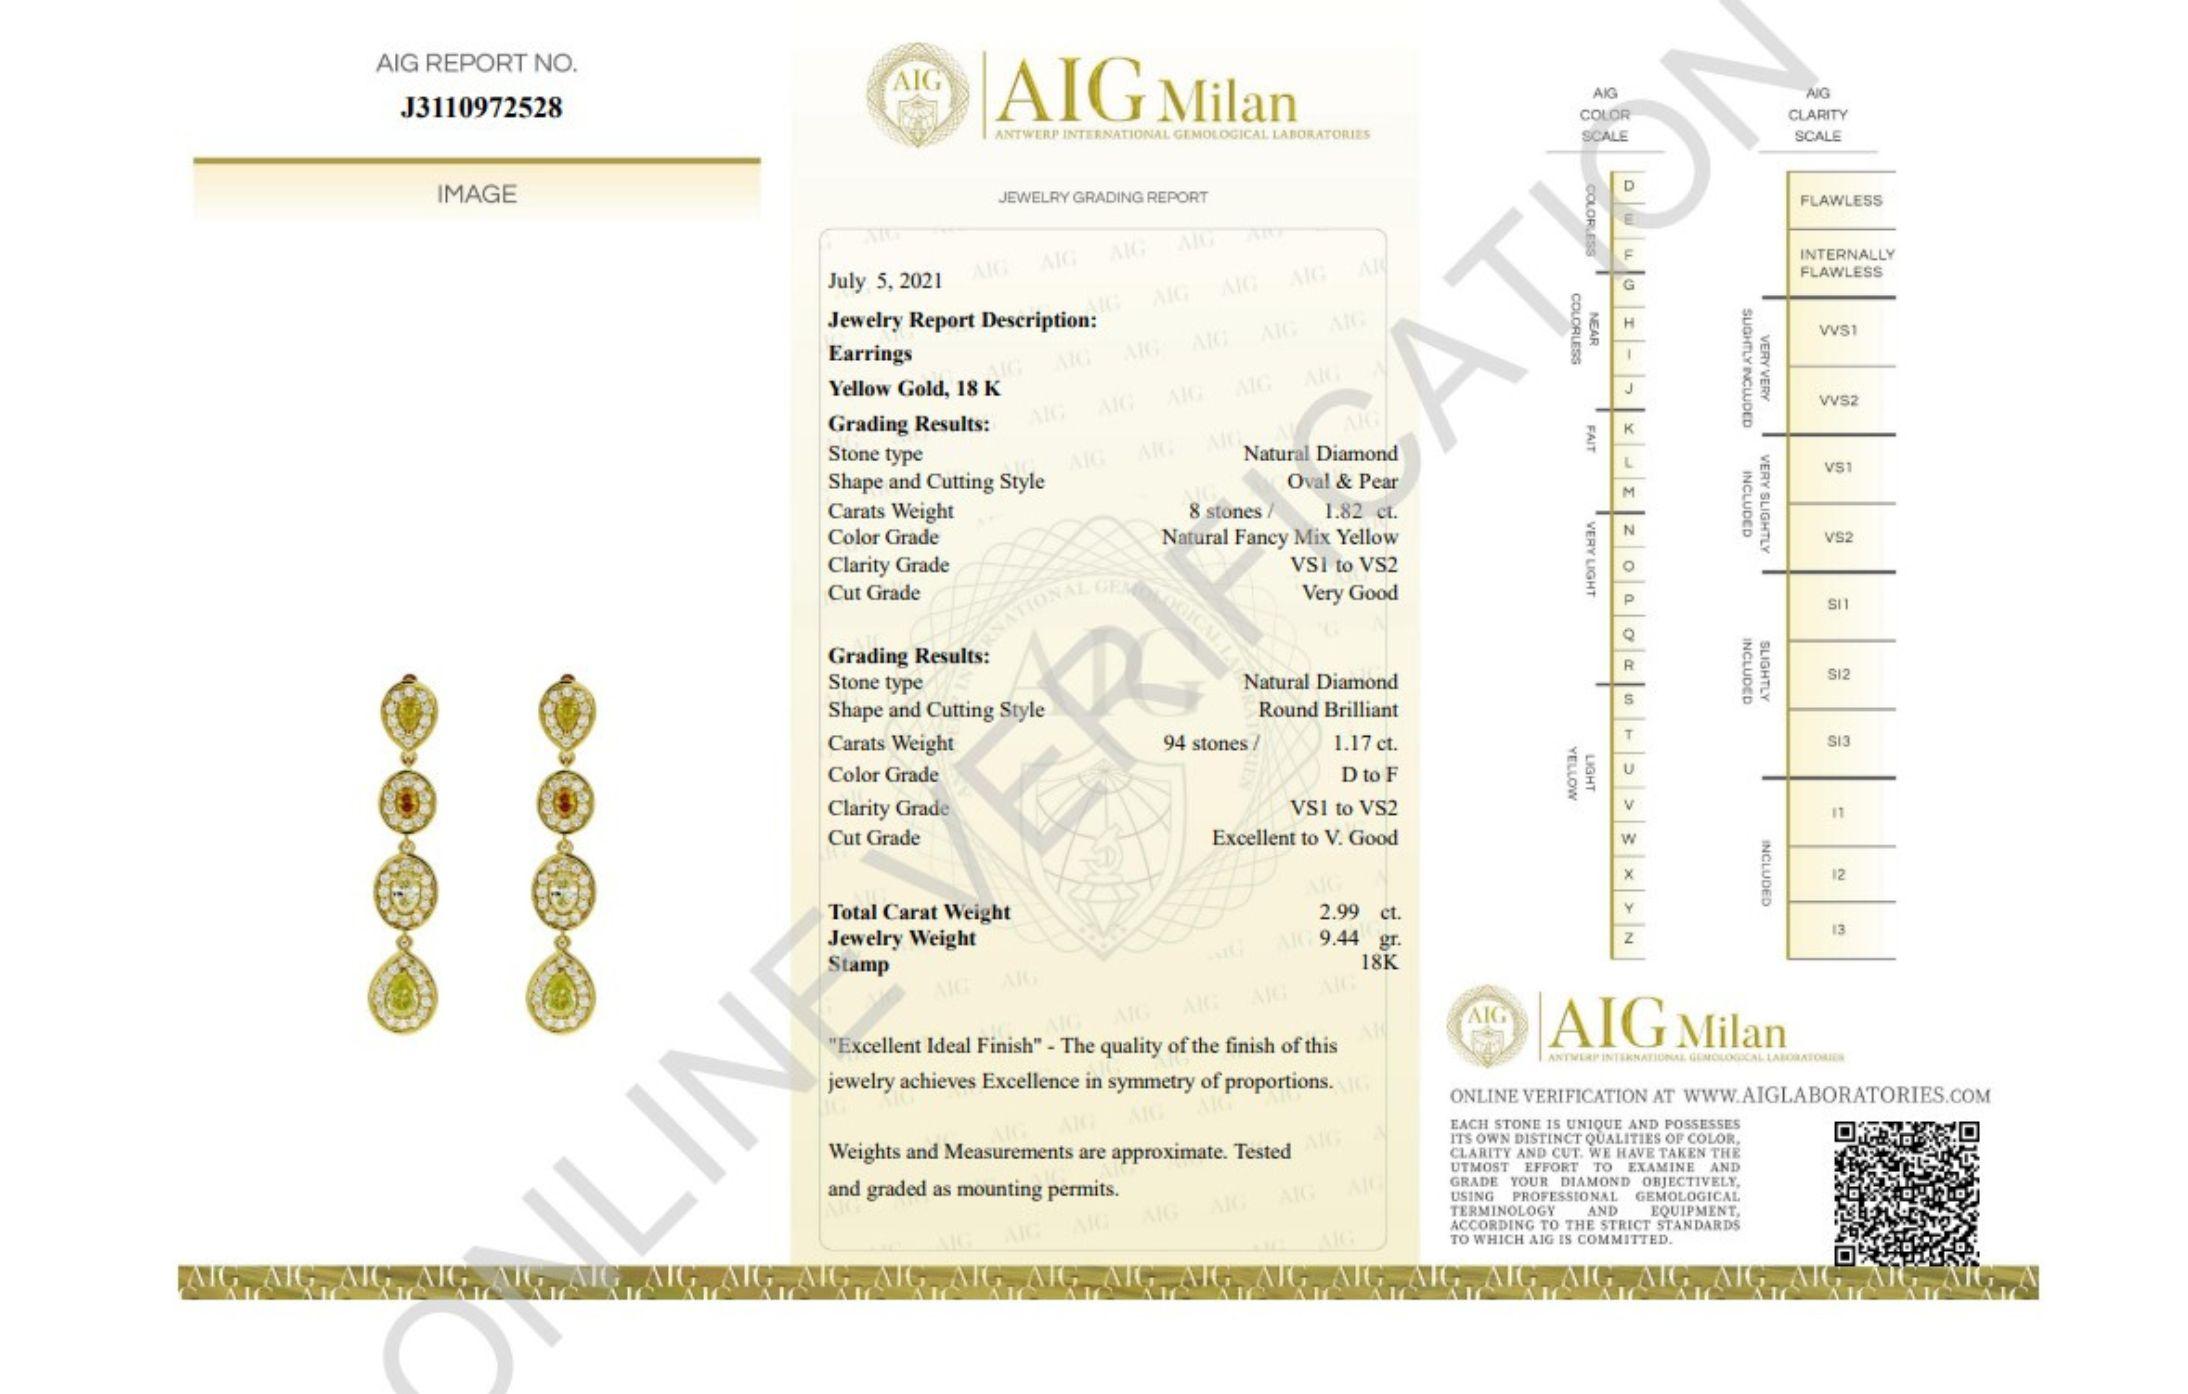 Luxurious 18k White Gold Drop Earring with 2.99 ct Natural Diamonds- AIG cert For Sale 4